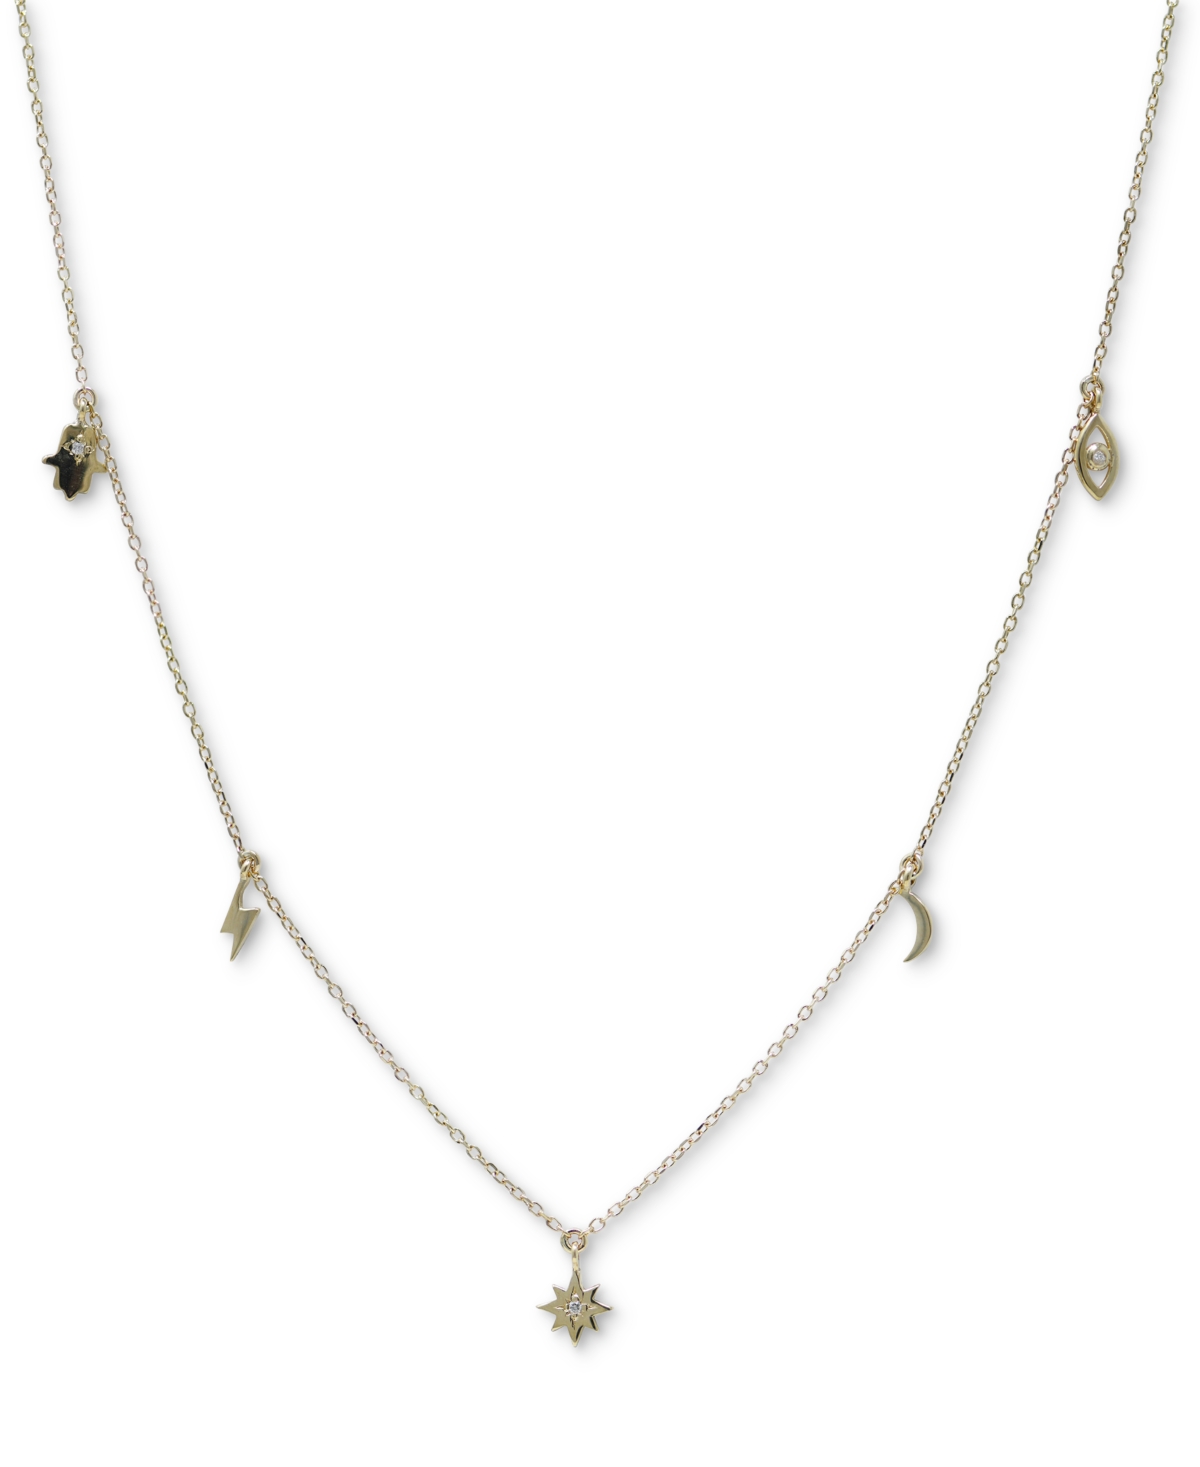 Diamond Accent Multi-Charm Statement Necklace in 14k Gold, 15" + 1" extender - Gold